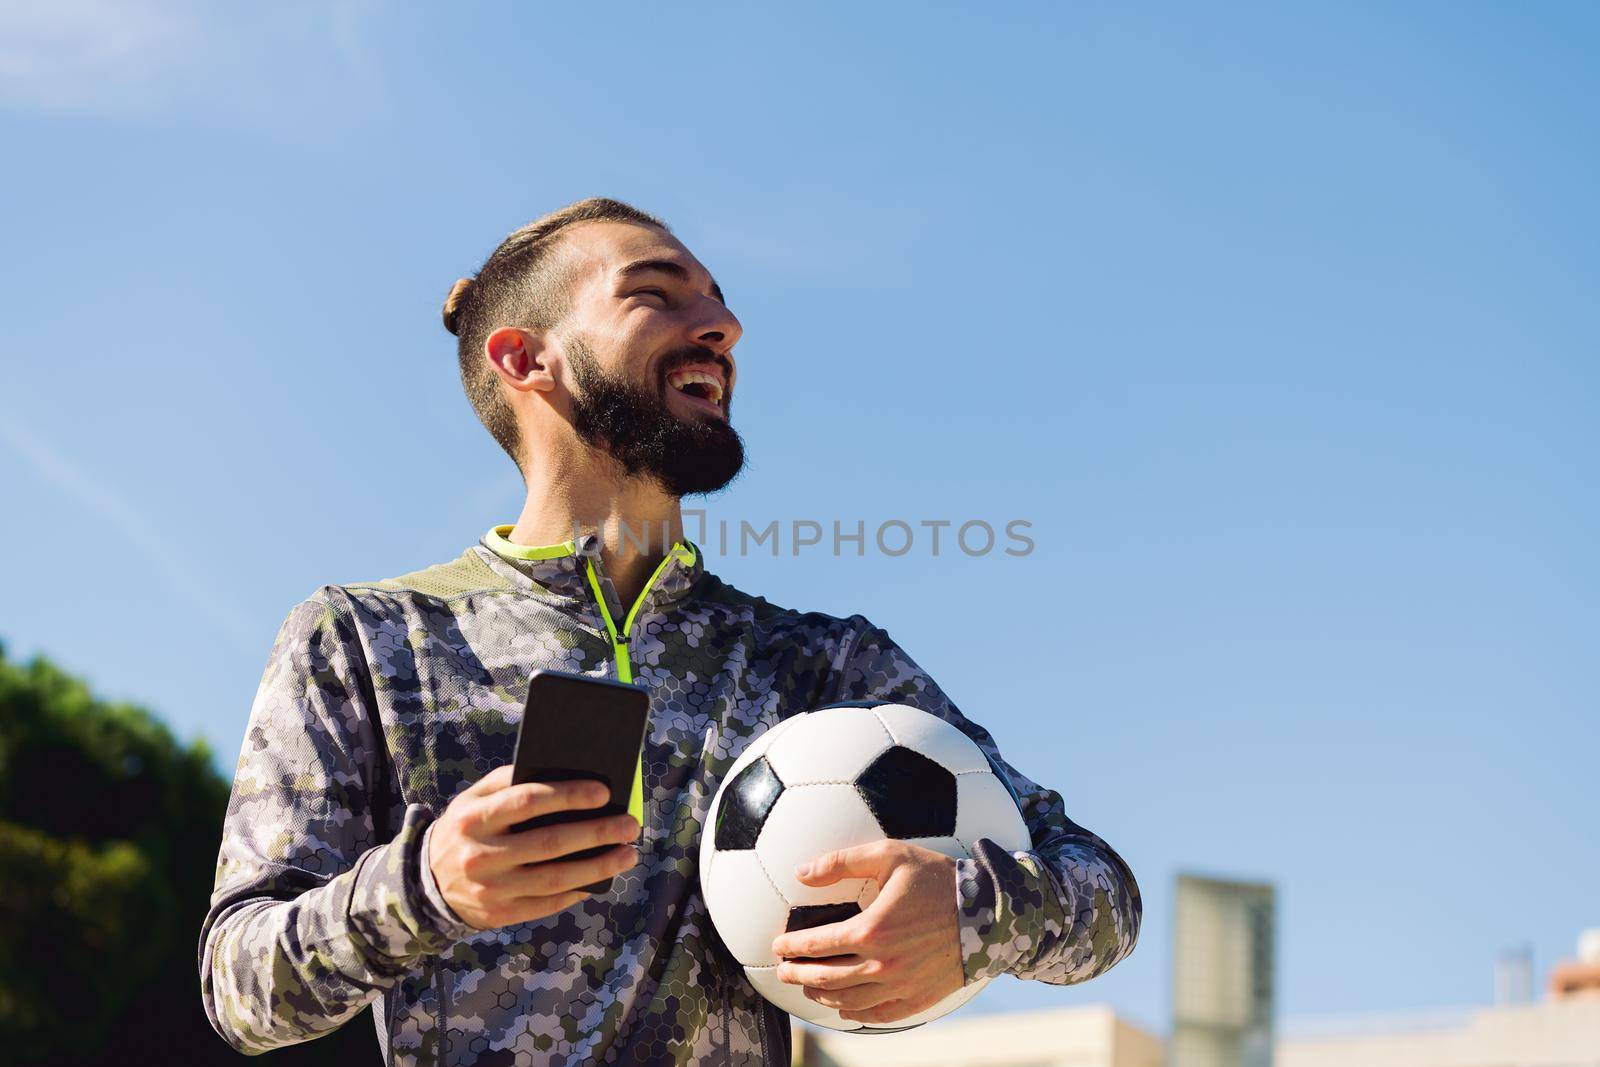 horizontal portrait of a happy sportsman with a soccer ball laughing with the phone in his hand, concept of technology and urban sport lifestyle in the city, copy space for text